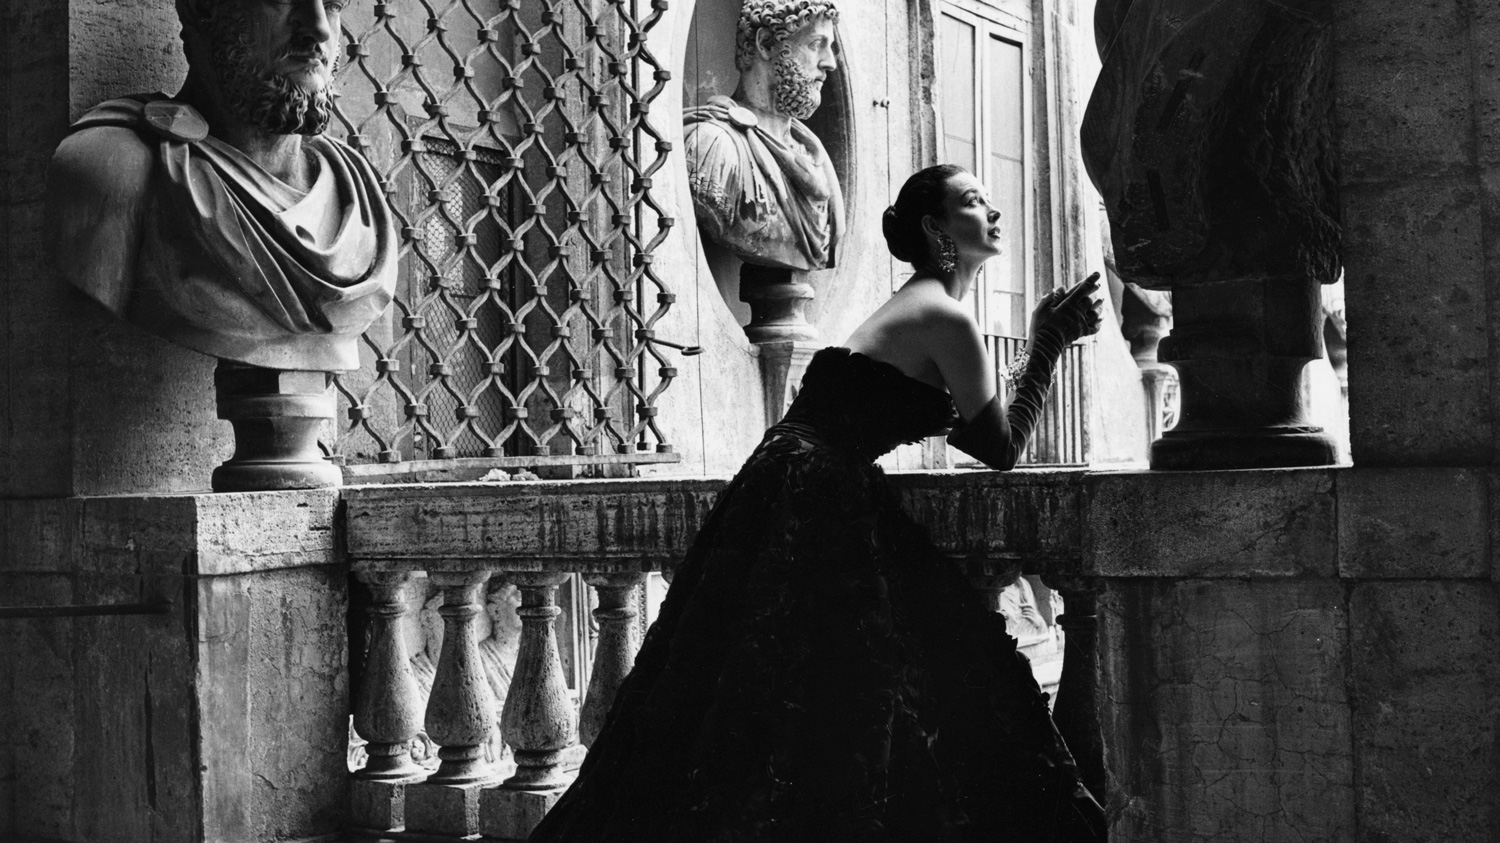 Black and white photo of a woman in a long black sleeveless gown leaning against a stone bannister in a museum-like setting